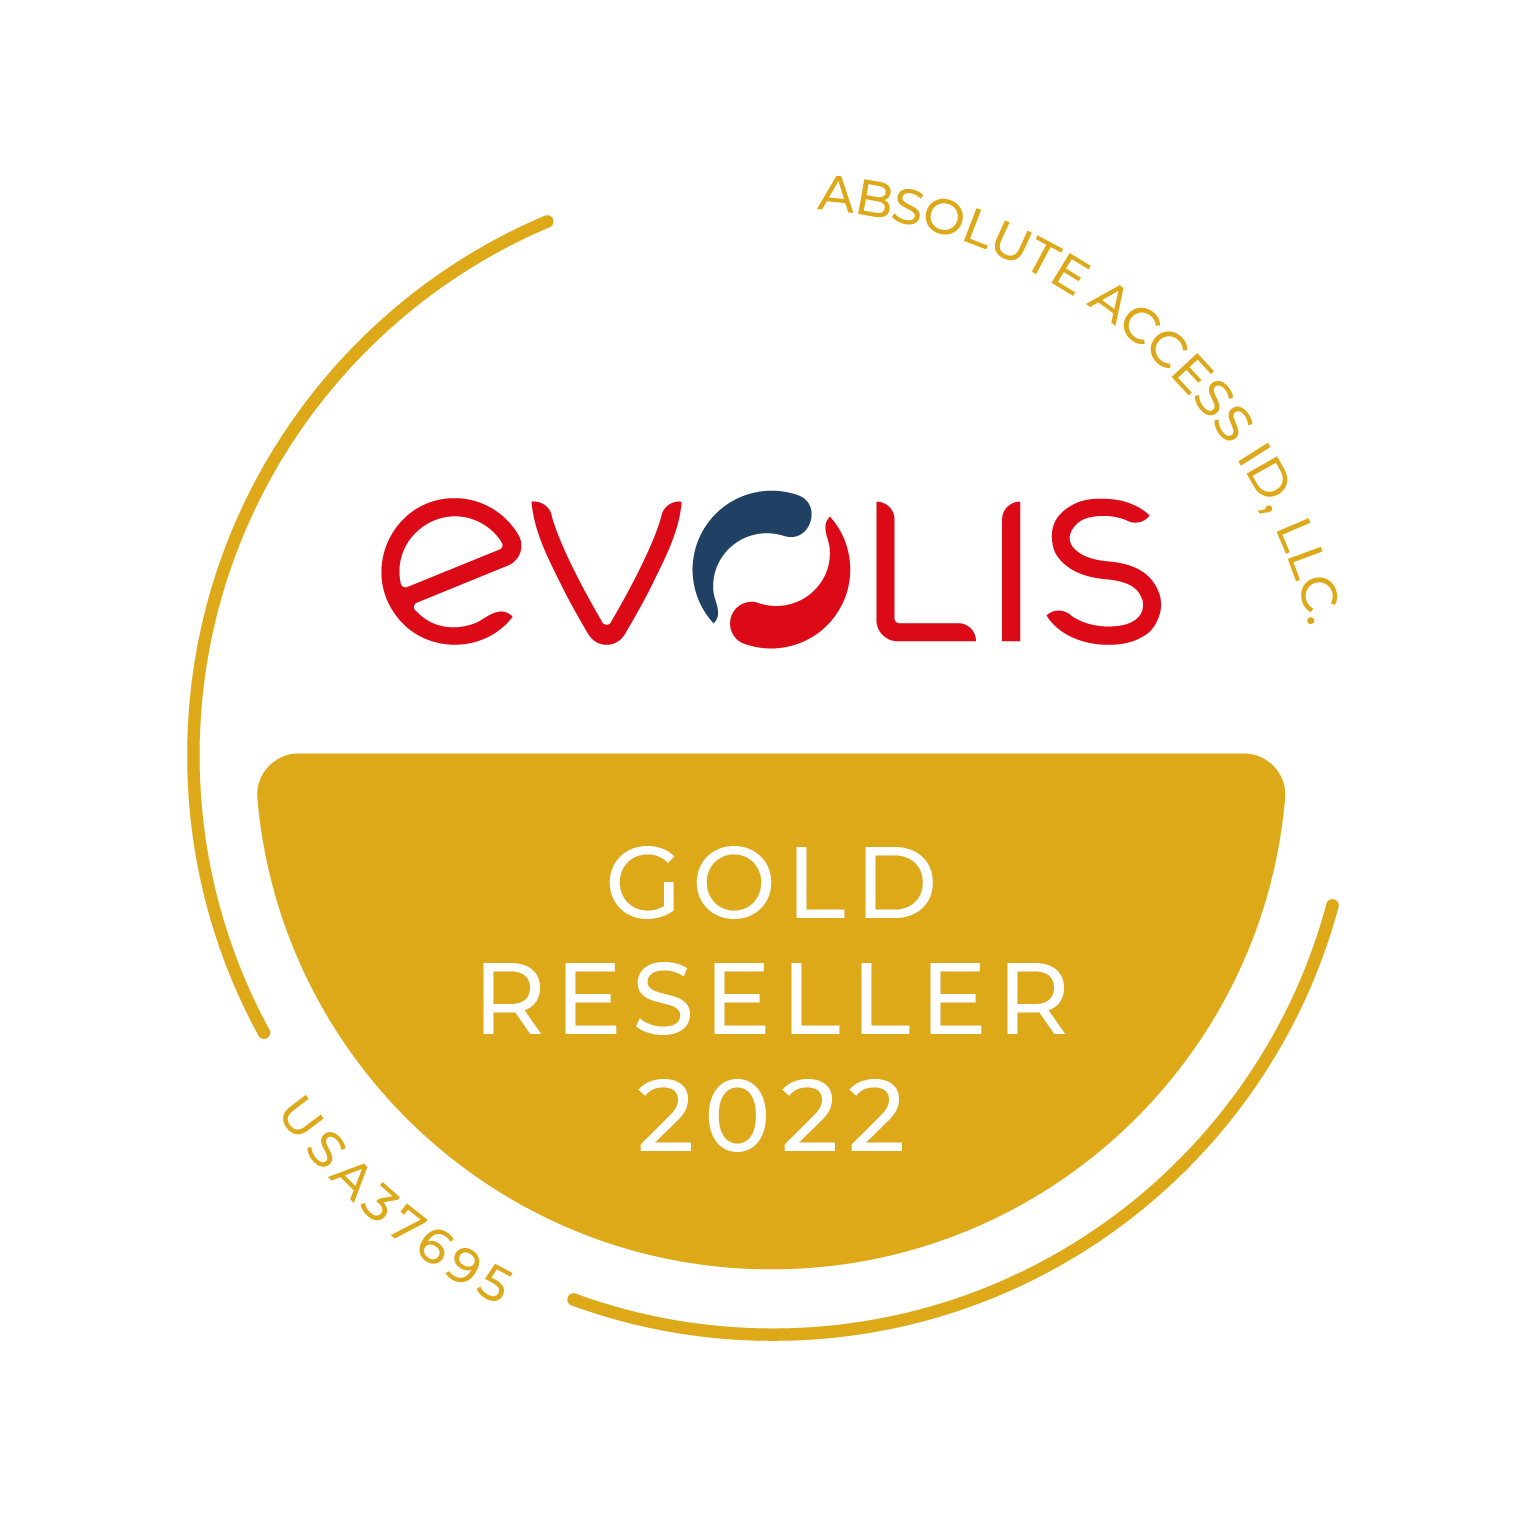 AAID is a Evolis Gold Reseller